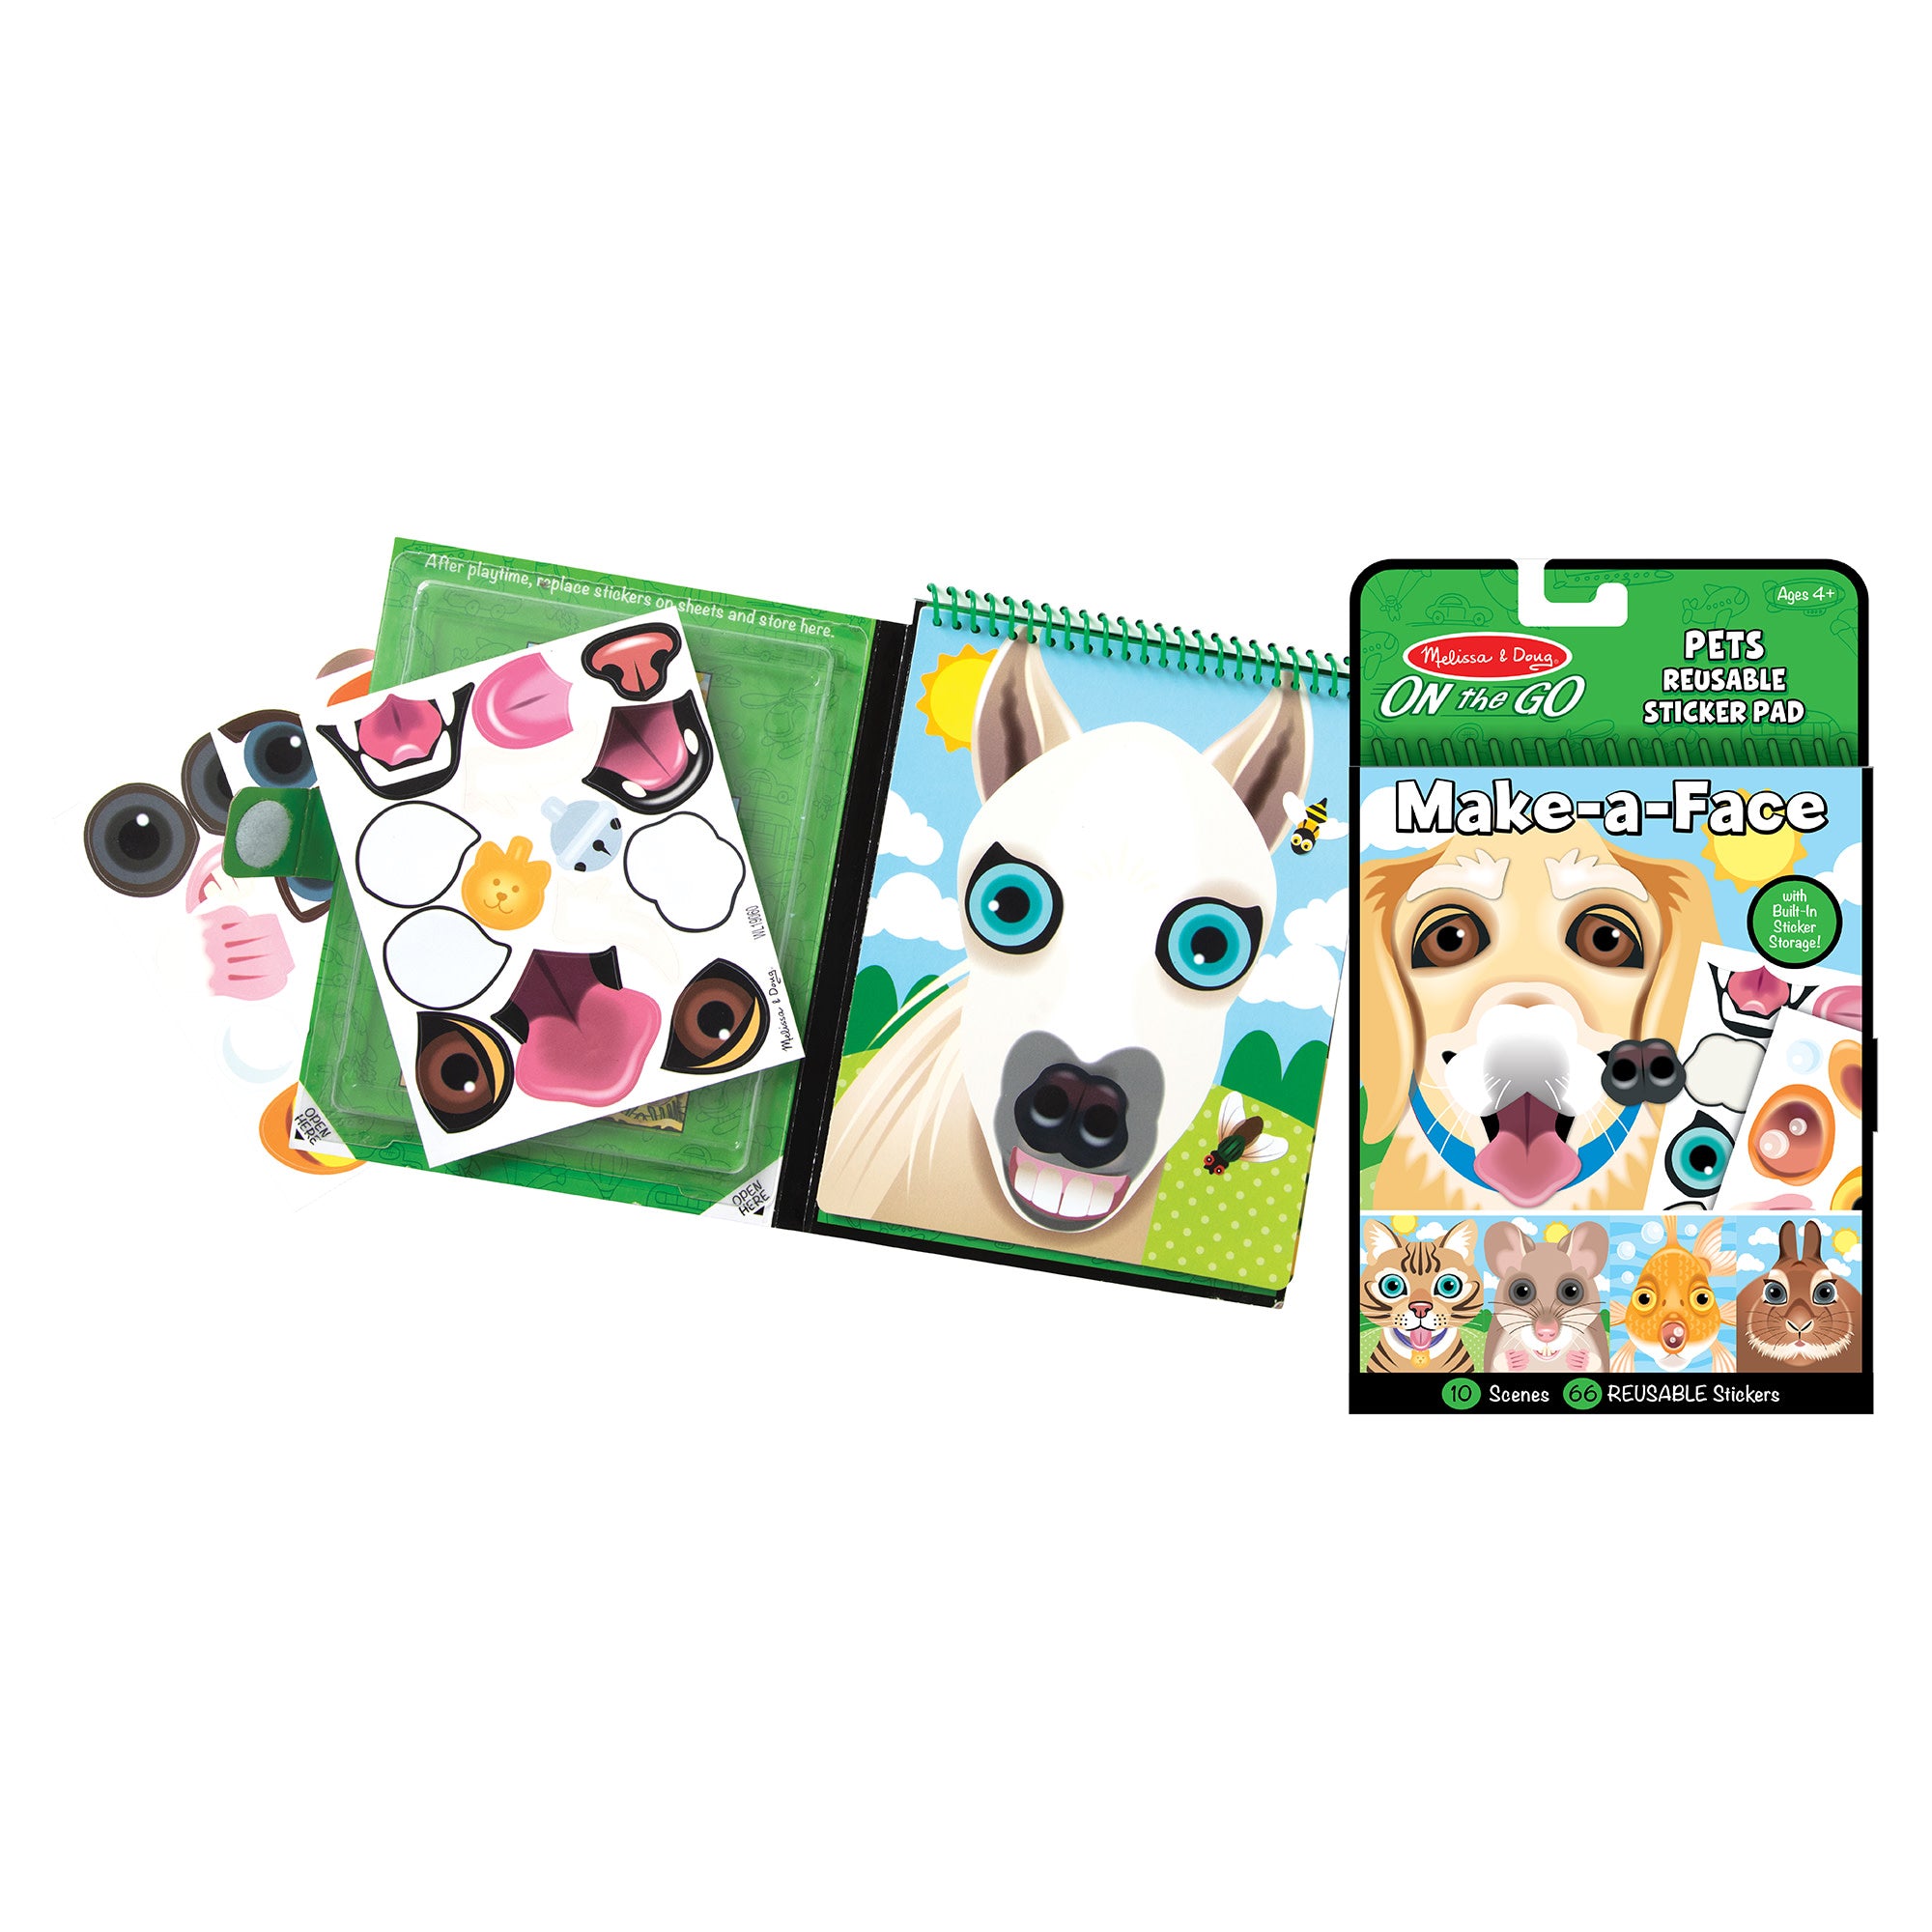 Make-a-Face – Pets Reusable Sticker Pad – On the Go Travel Activity